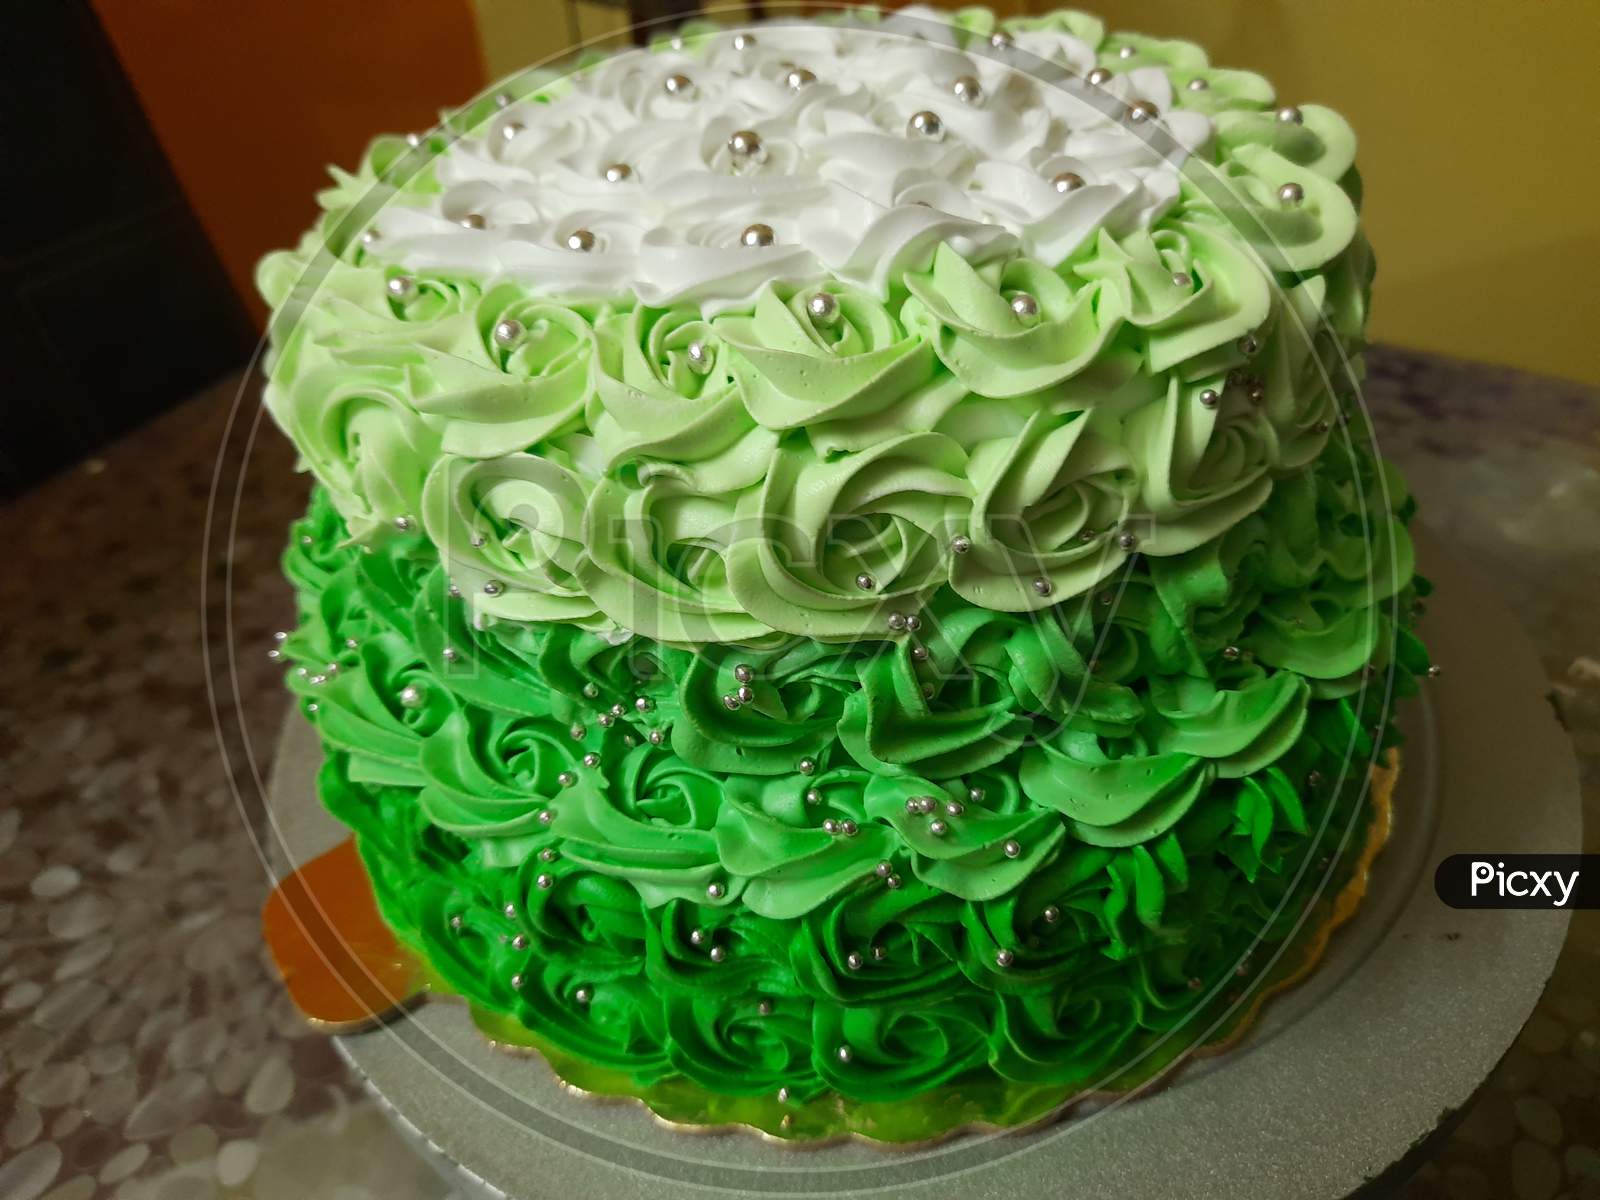 Two tier cake